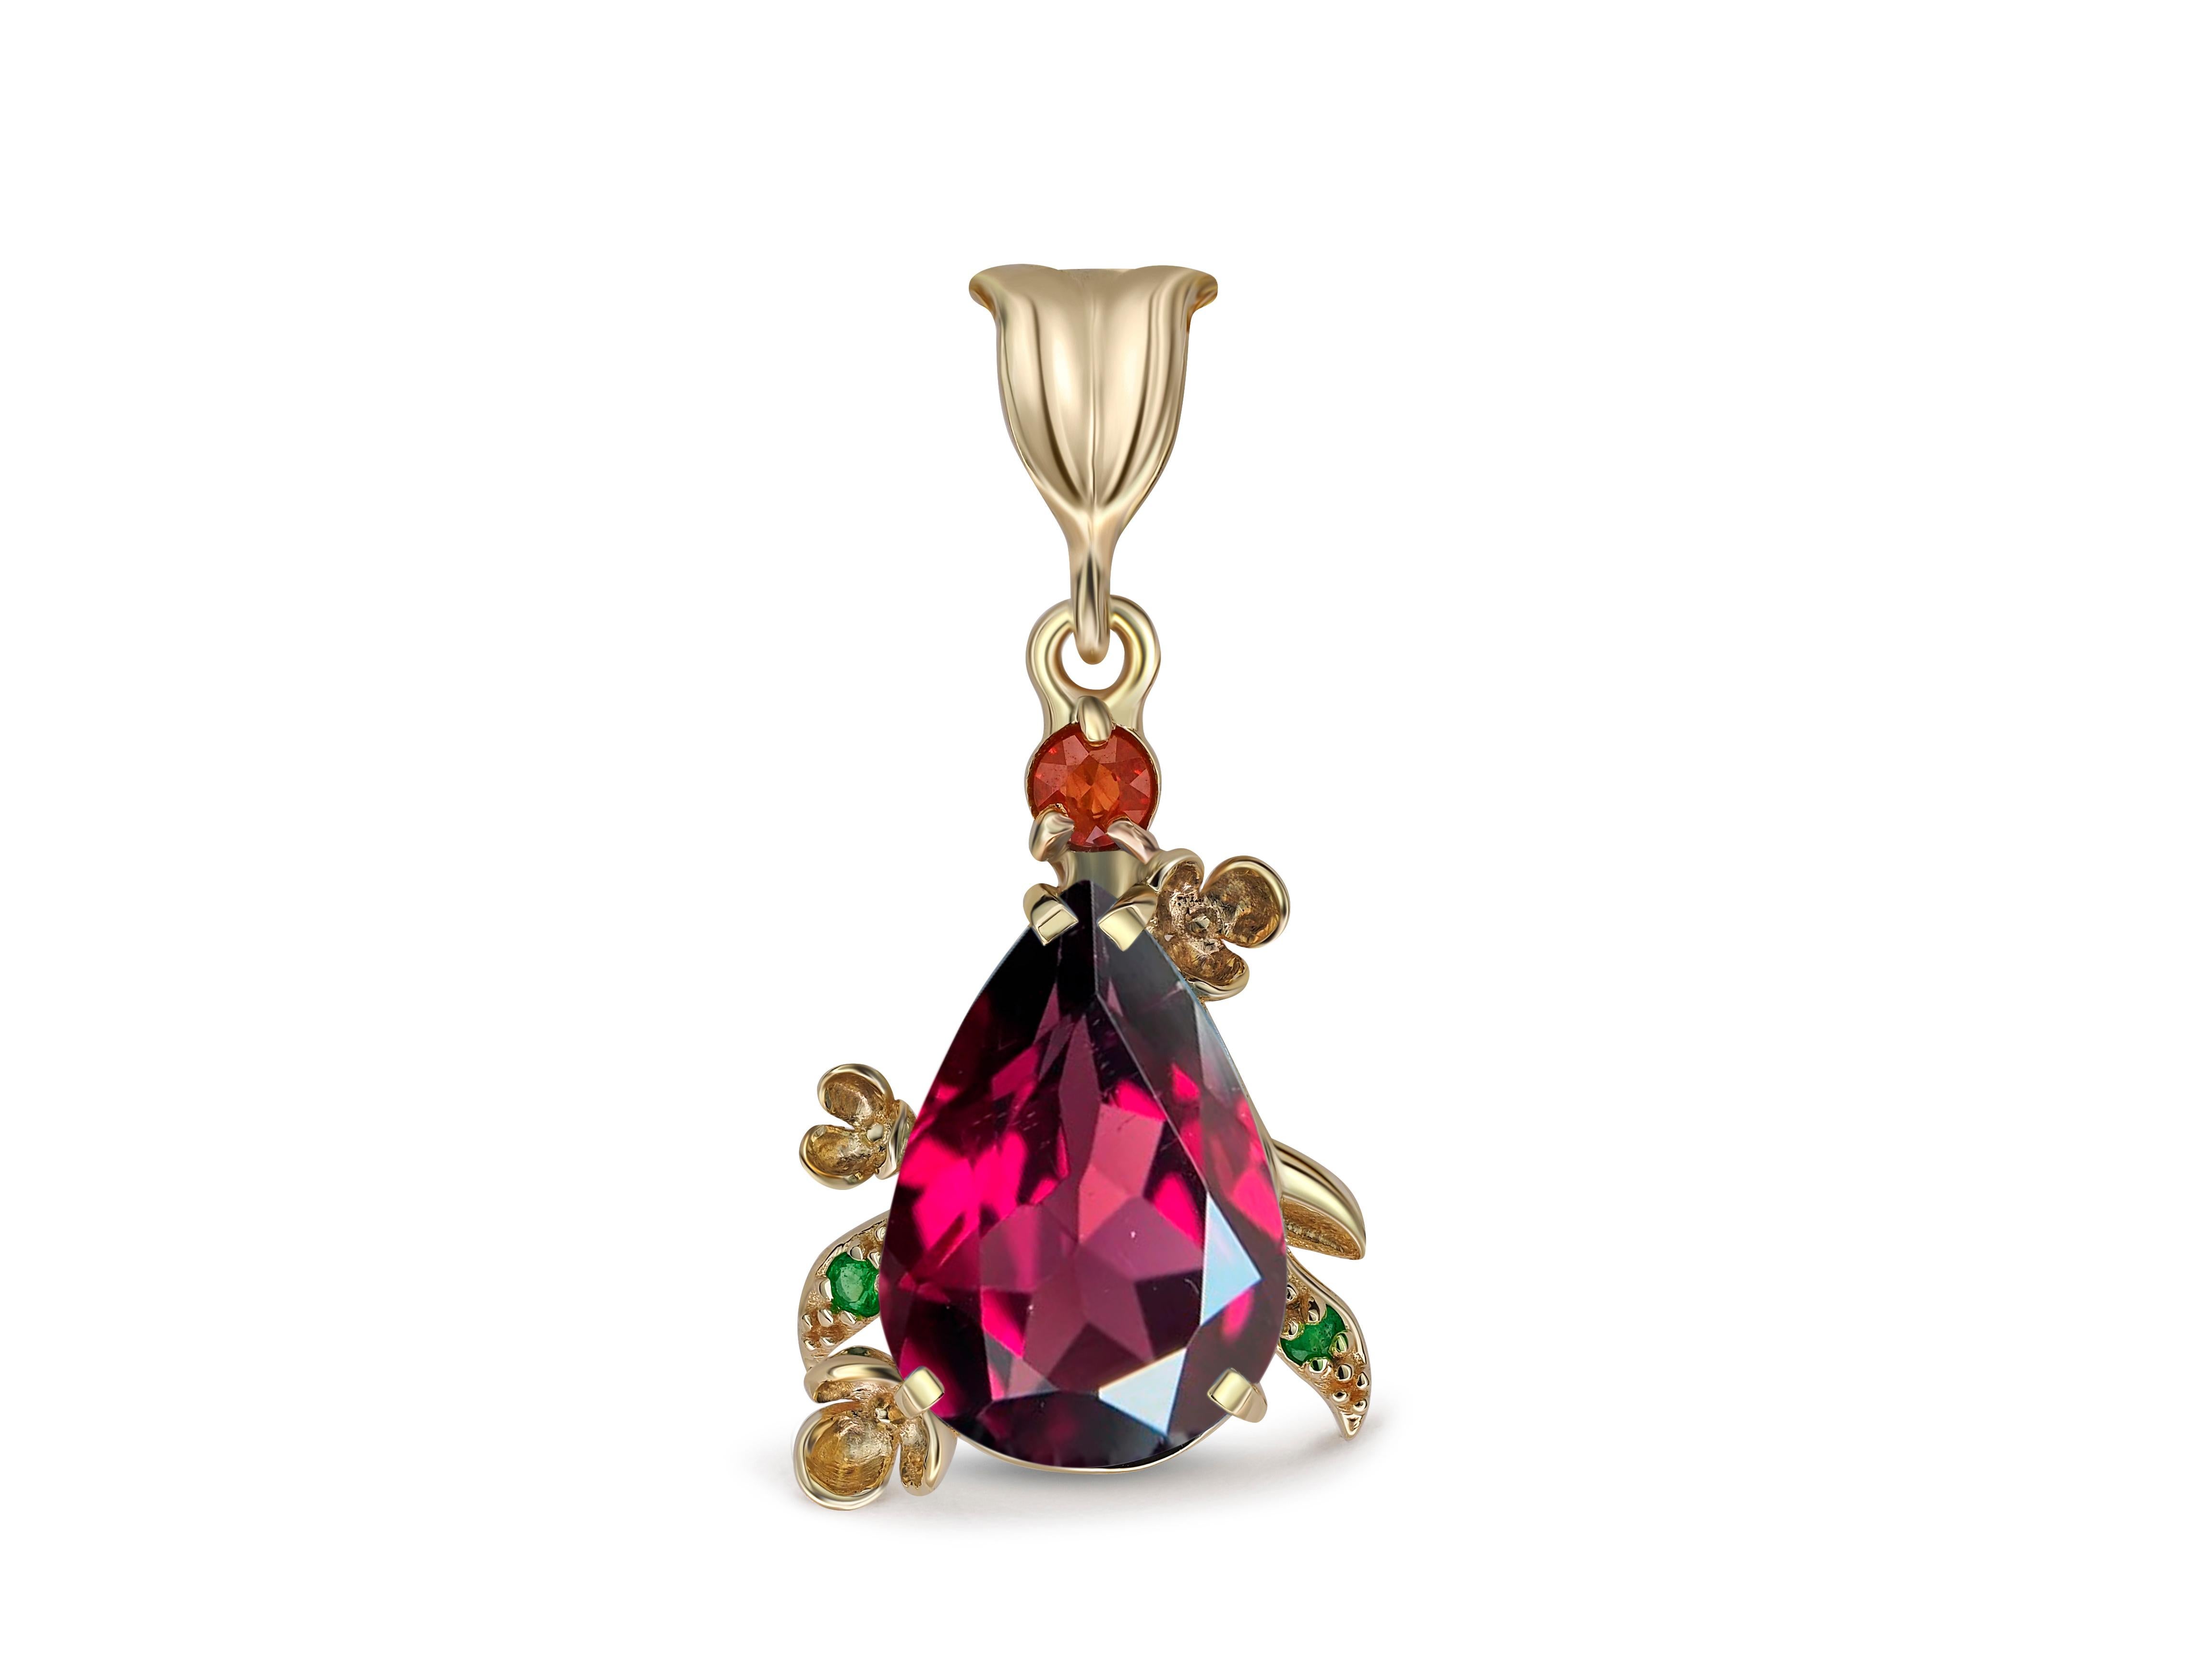 Pear Garnet Pendant in 14 Karat Gold. 
Flower design pendant with natural garnet. Garnet gold pendant. January birthstone pendant. 

Metal: 14k gold
Weight: 2.85 g.
Pendant size: 30x14.5 mm.

Set with garnet
Color - red, pear cut, aprox 2.5